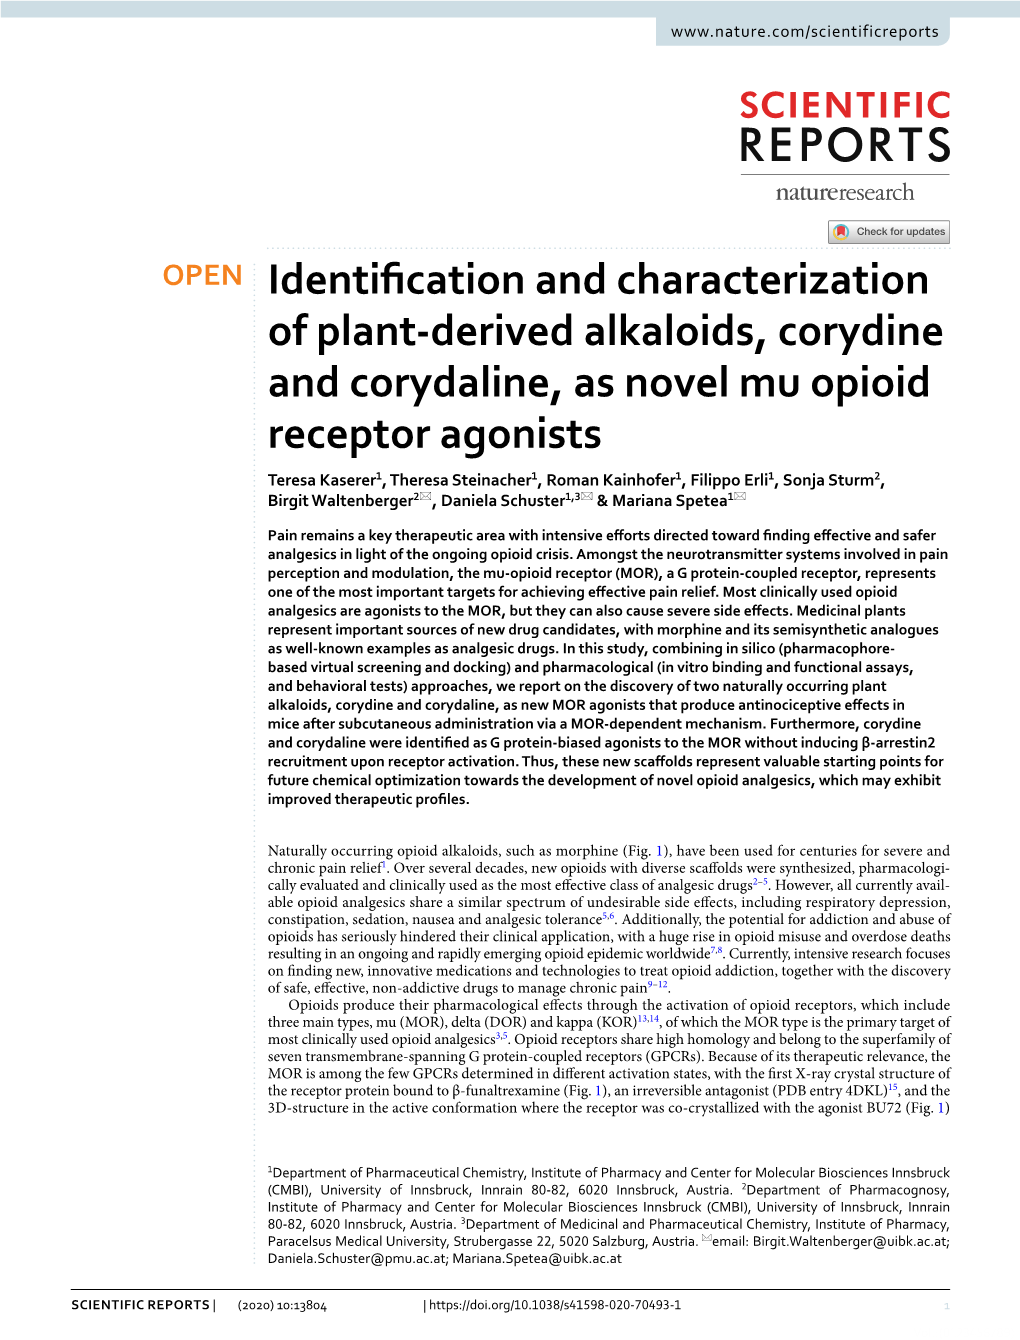 Identification and Characterization of Plant-Derived Alkaloids, Corydine